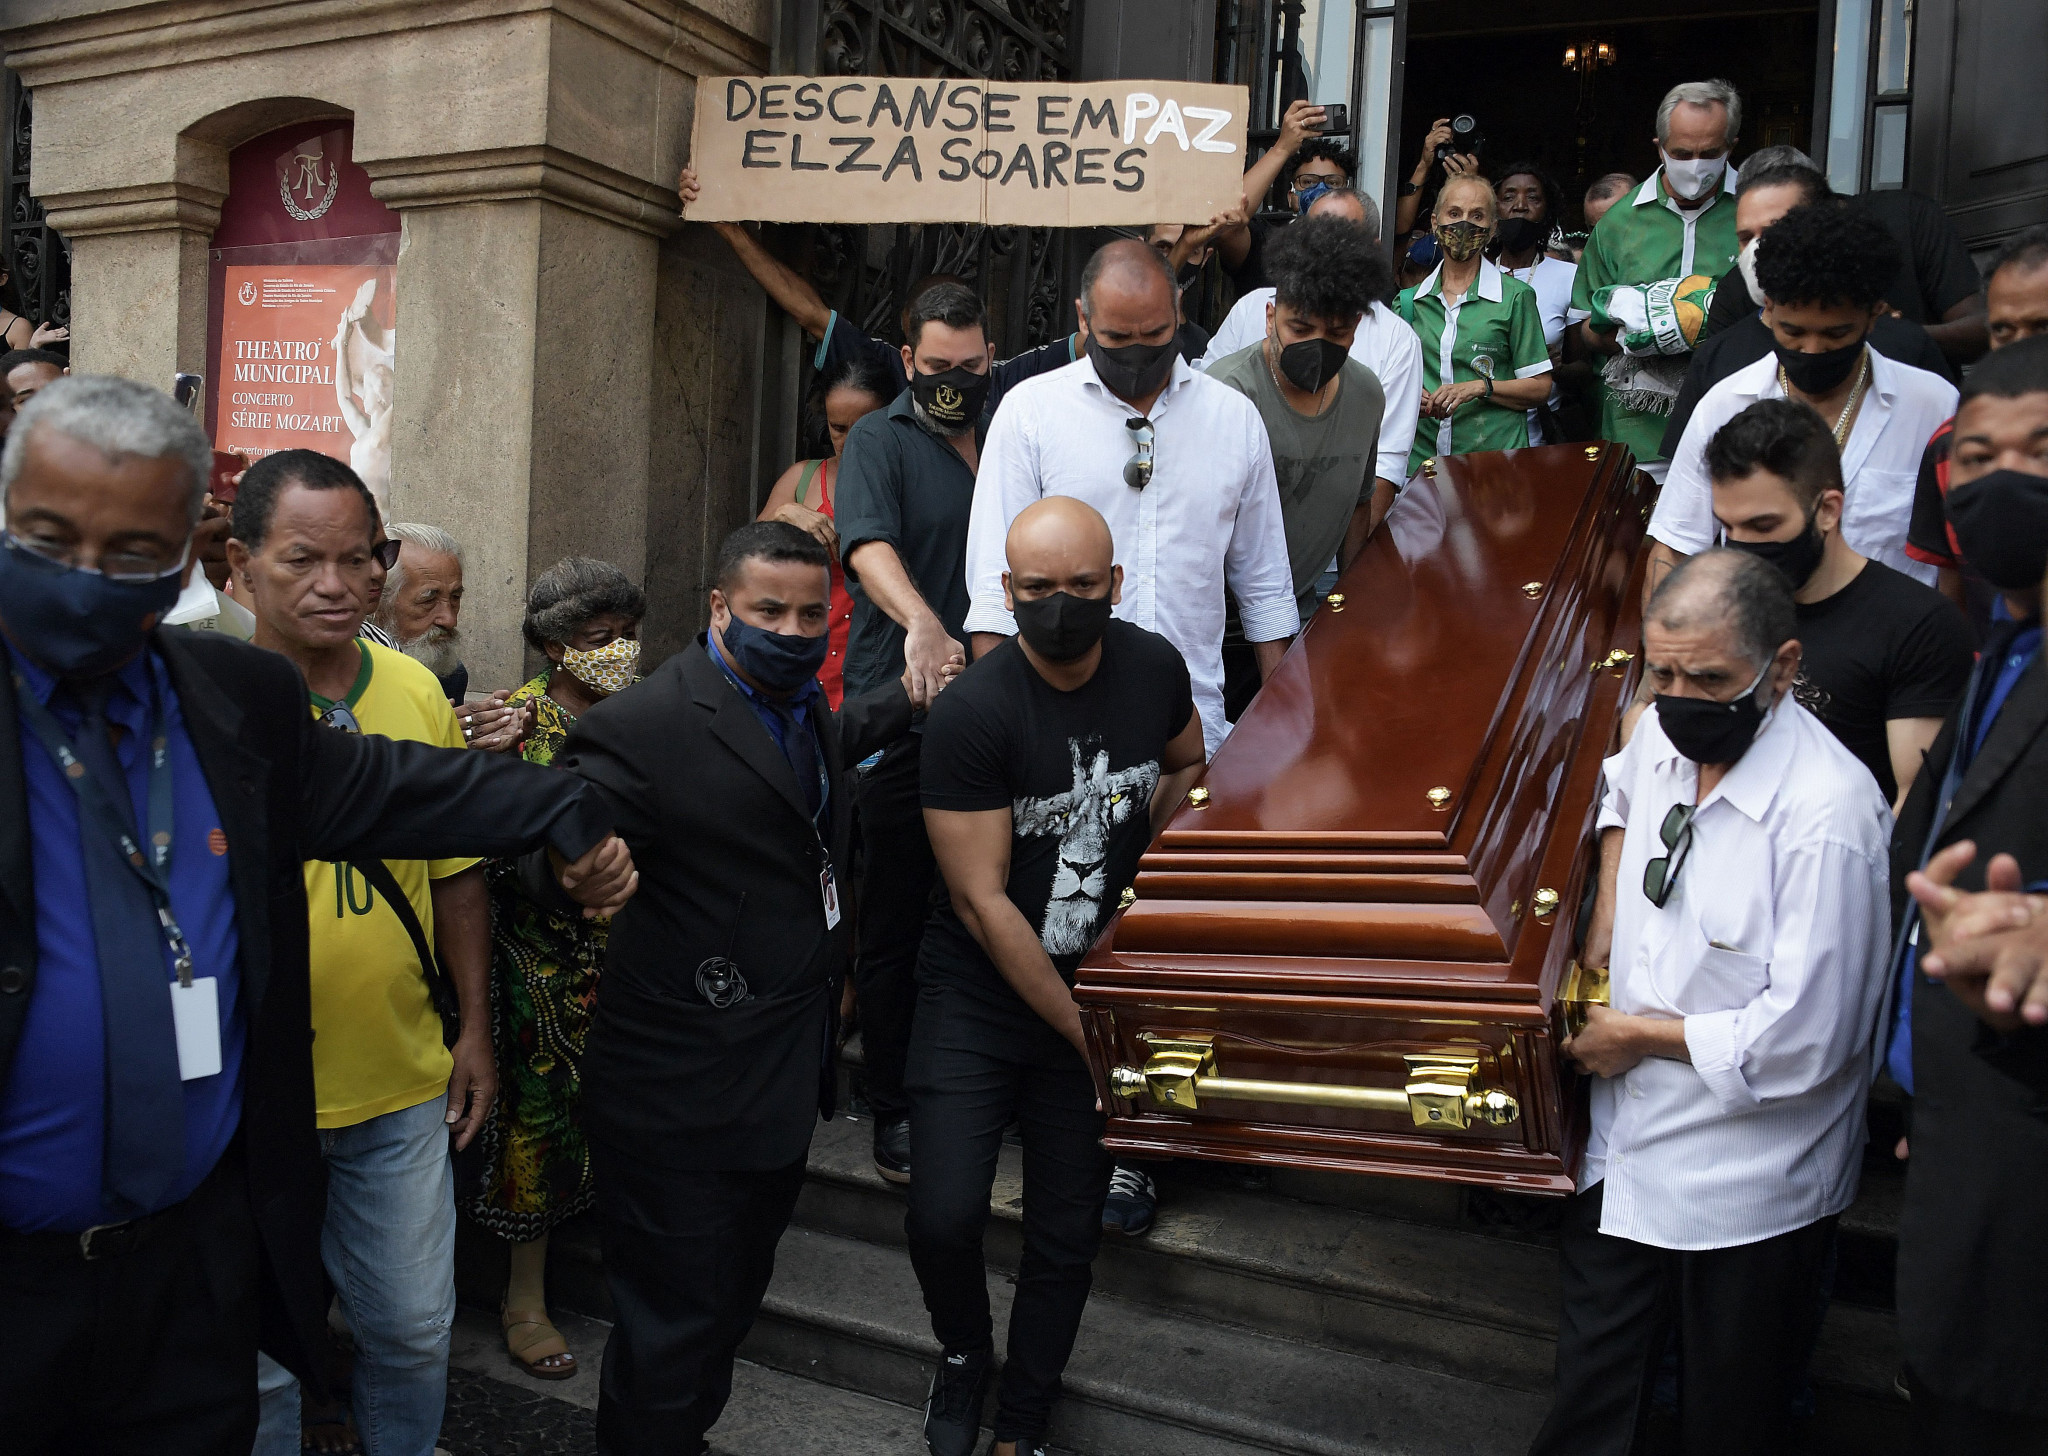 Samba singer Elza Soares was laid to rest in Rio de Janeiro © Getty Images